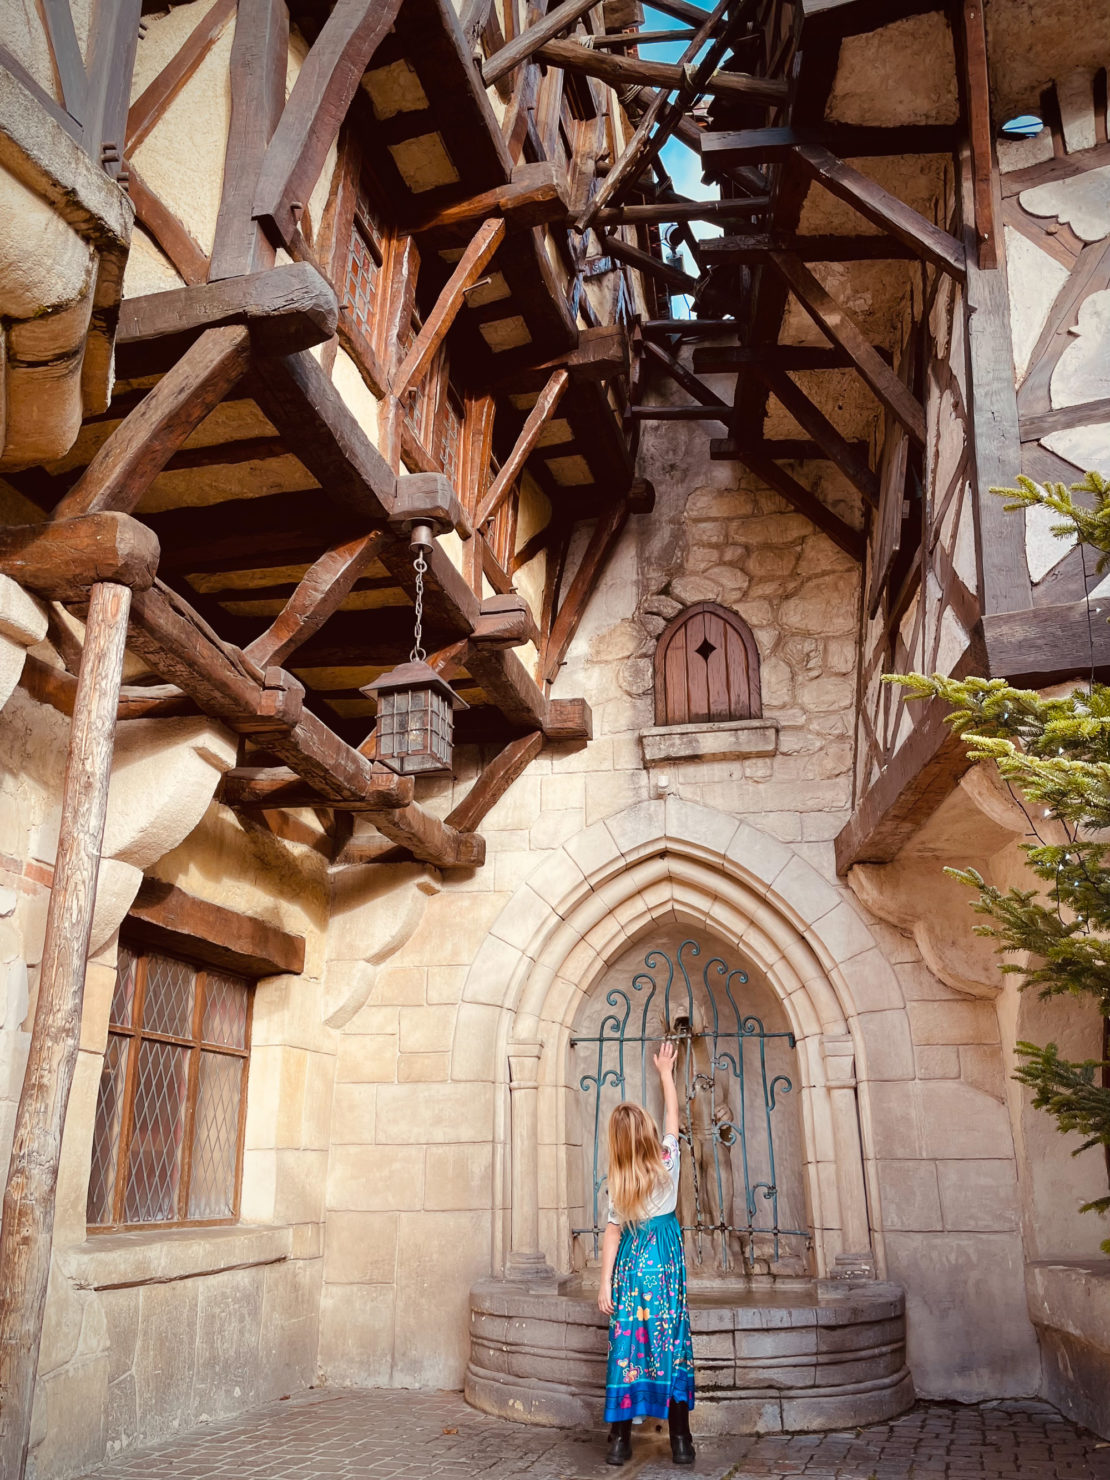 Child in the medieval centre in Parc Asterix in France - the Parc Asterix Review